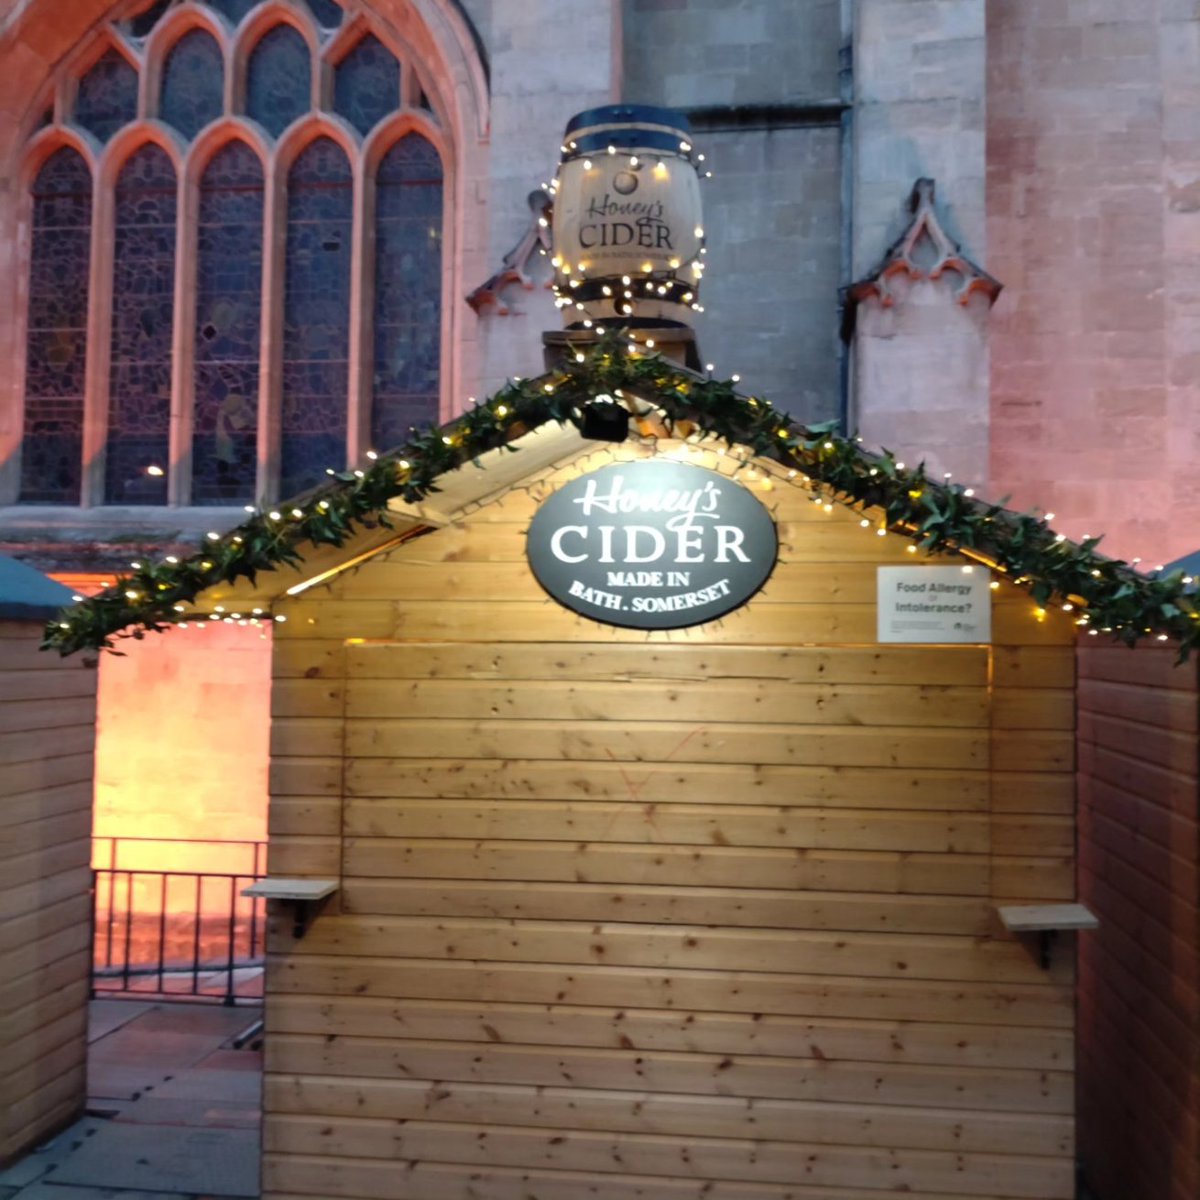 All assembled for @bathchristmasmarket 2023 in the Abbey Chambers off Abbey Square, just got to fill the chalet with cider! #bathchristmasmarket #christmasmarket #christmasgifts #christmaspresent #cider #mulledcider #giftpack #mulledciderkit